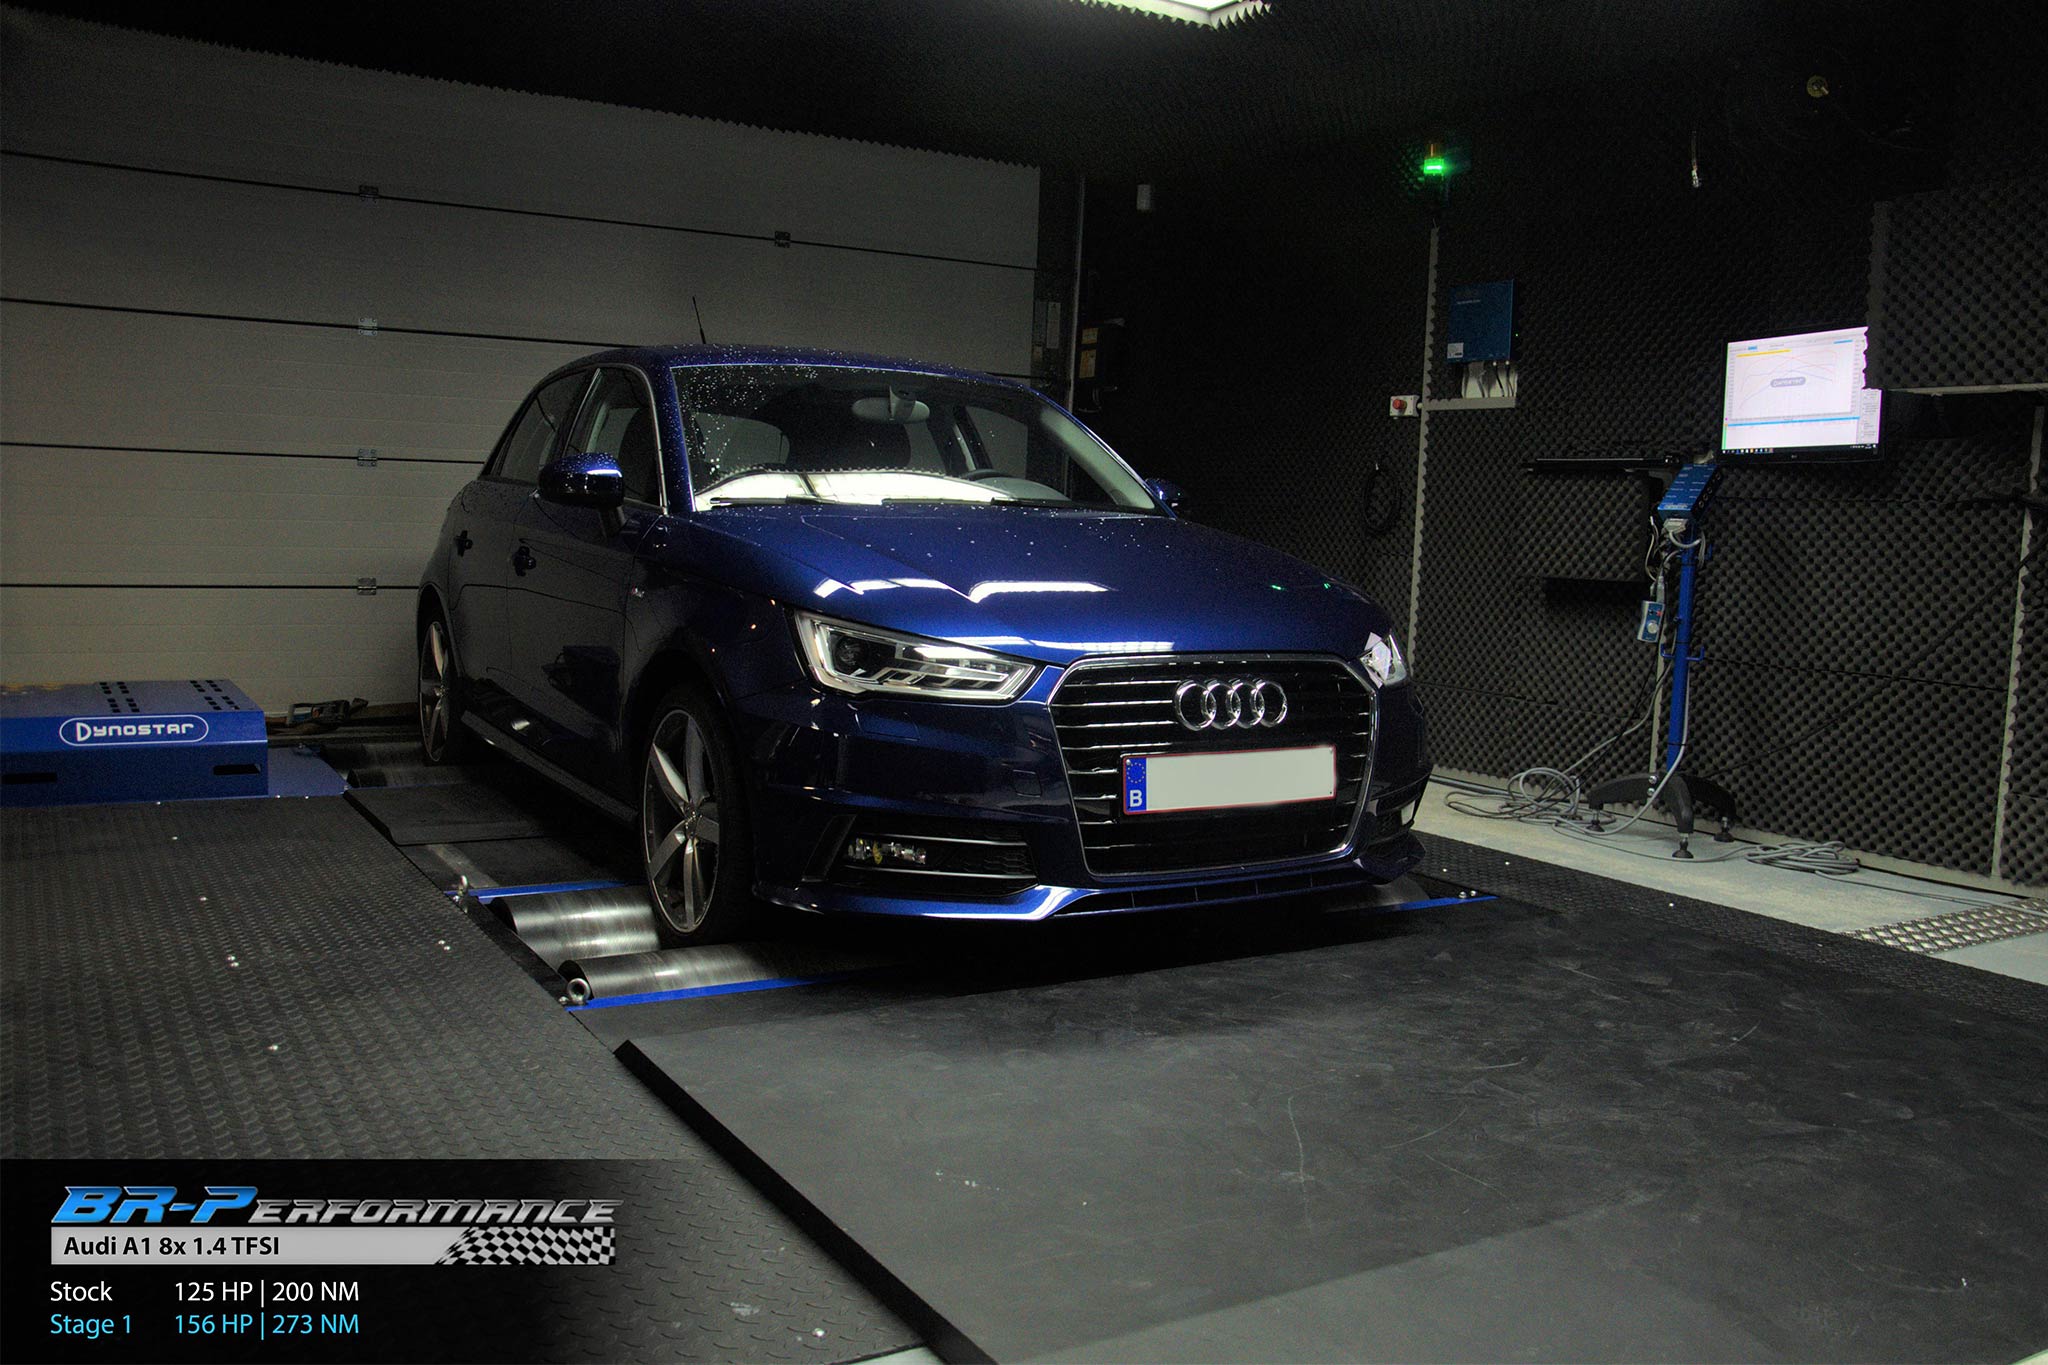 Tuning_Performance_Stage_1_Audi_A1_Xe_Tinhte.jpg